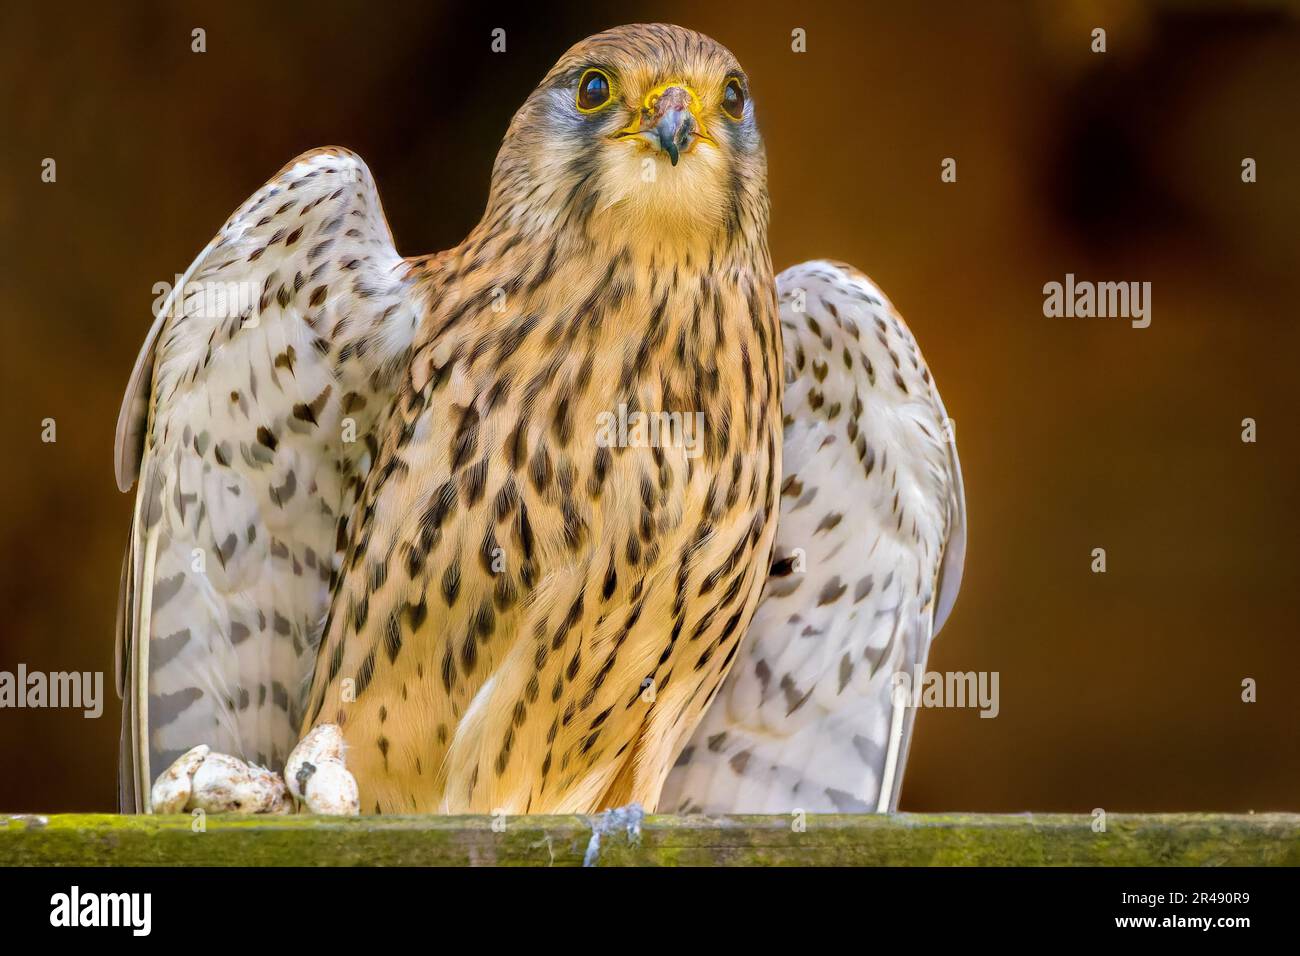 An adult common kestrel stands on a log, with its head held high and its eyes looking off into the distance Stock Photo